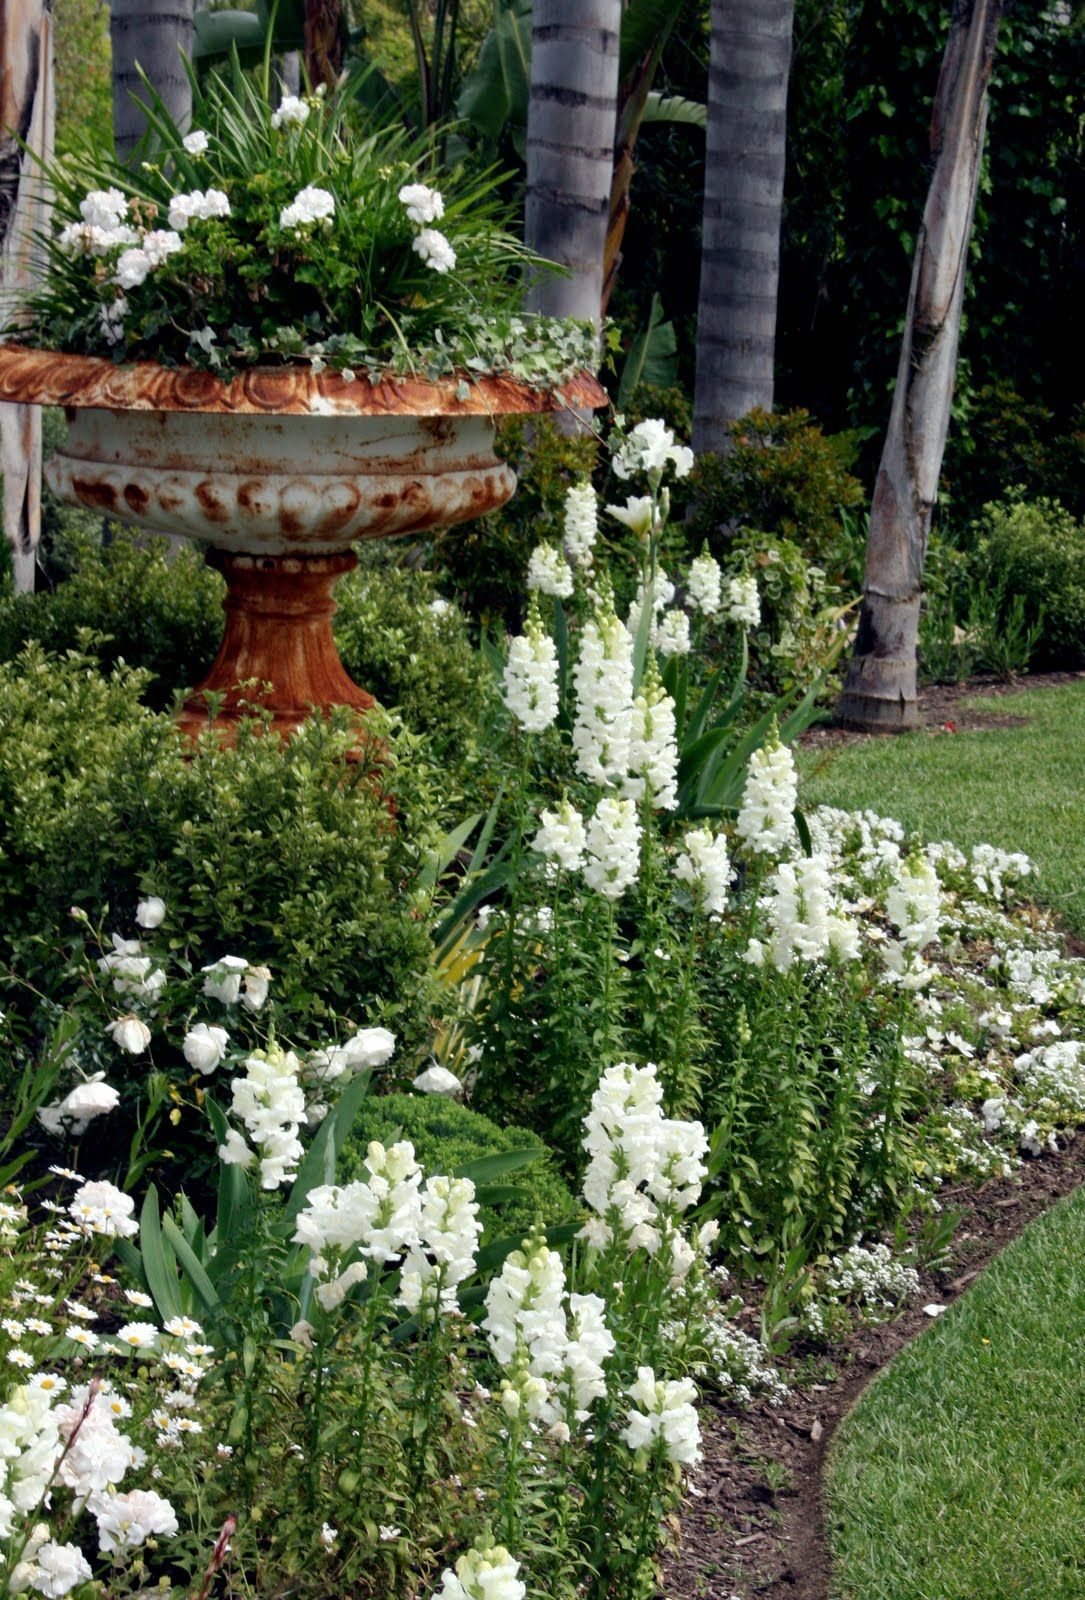 If you don't want to commit to an entire white garden, here's a great ex